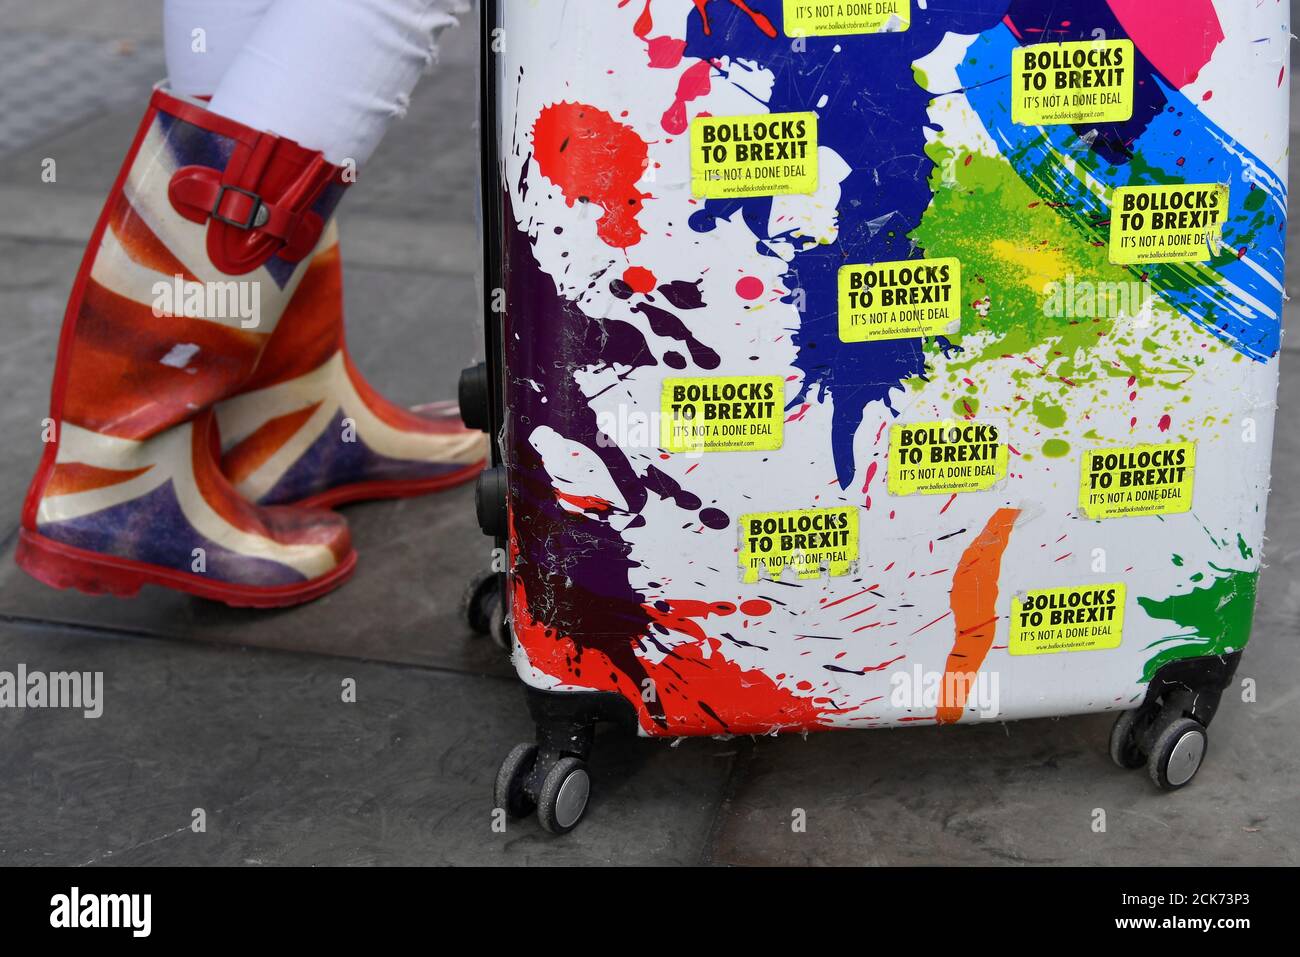 Anti-Brexit stickers are seen on a woman's suitcase in a street in London, Britain January 30, 2019. REUTERS/Toby Melville Stock Photo